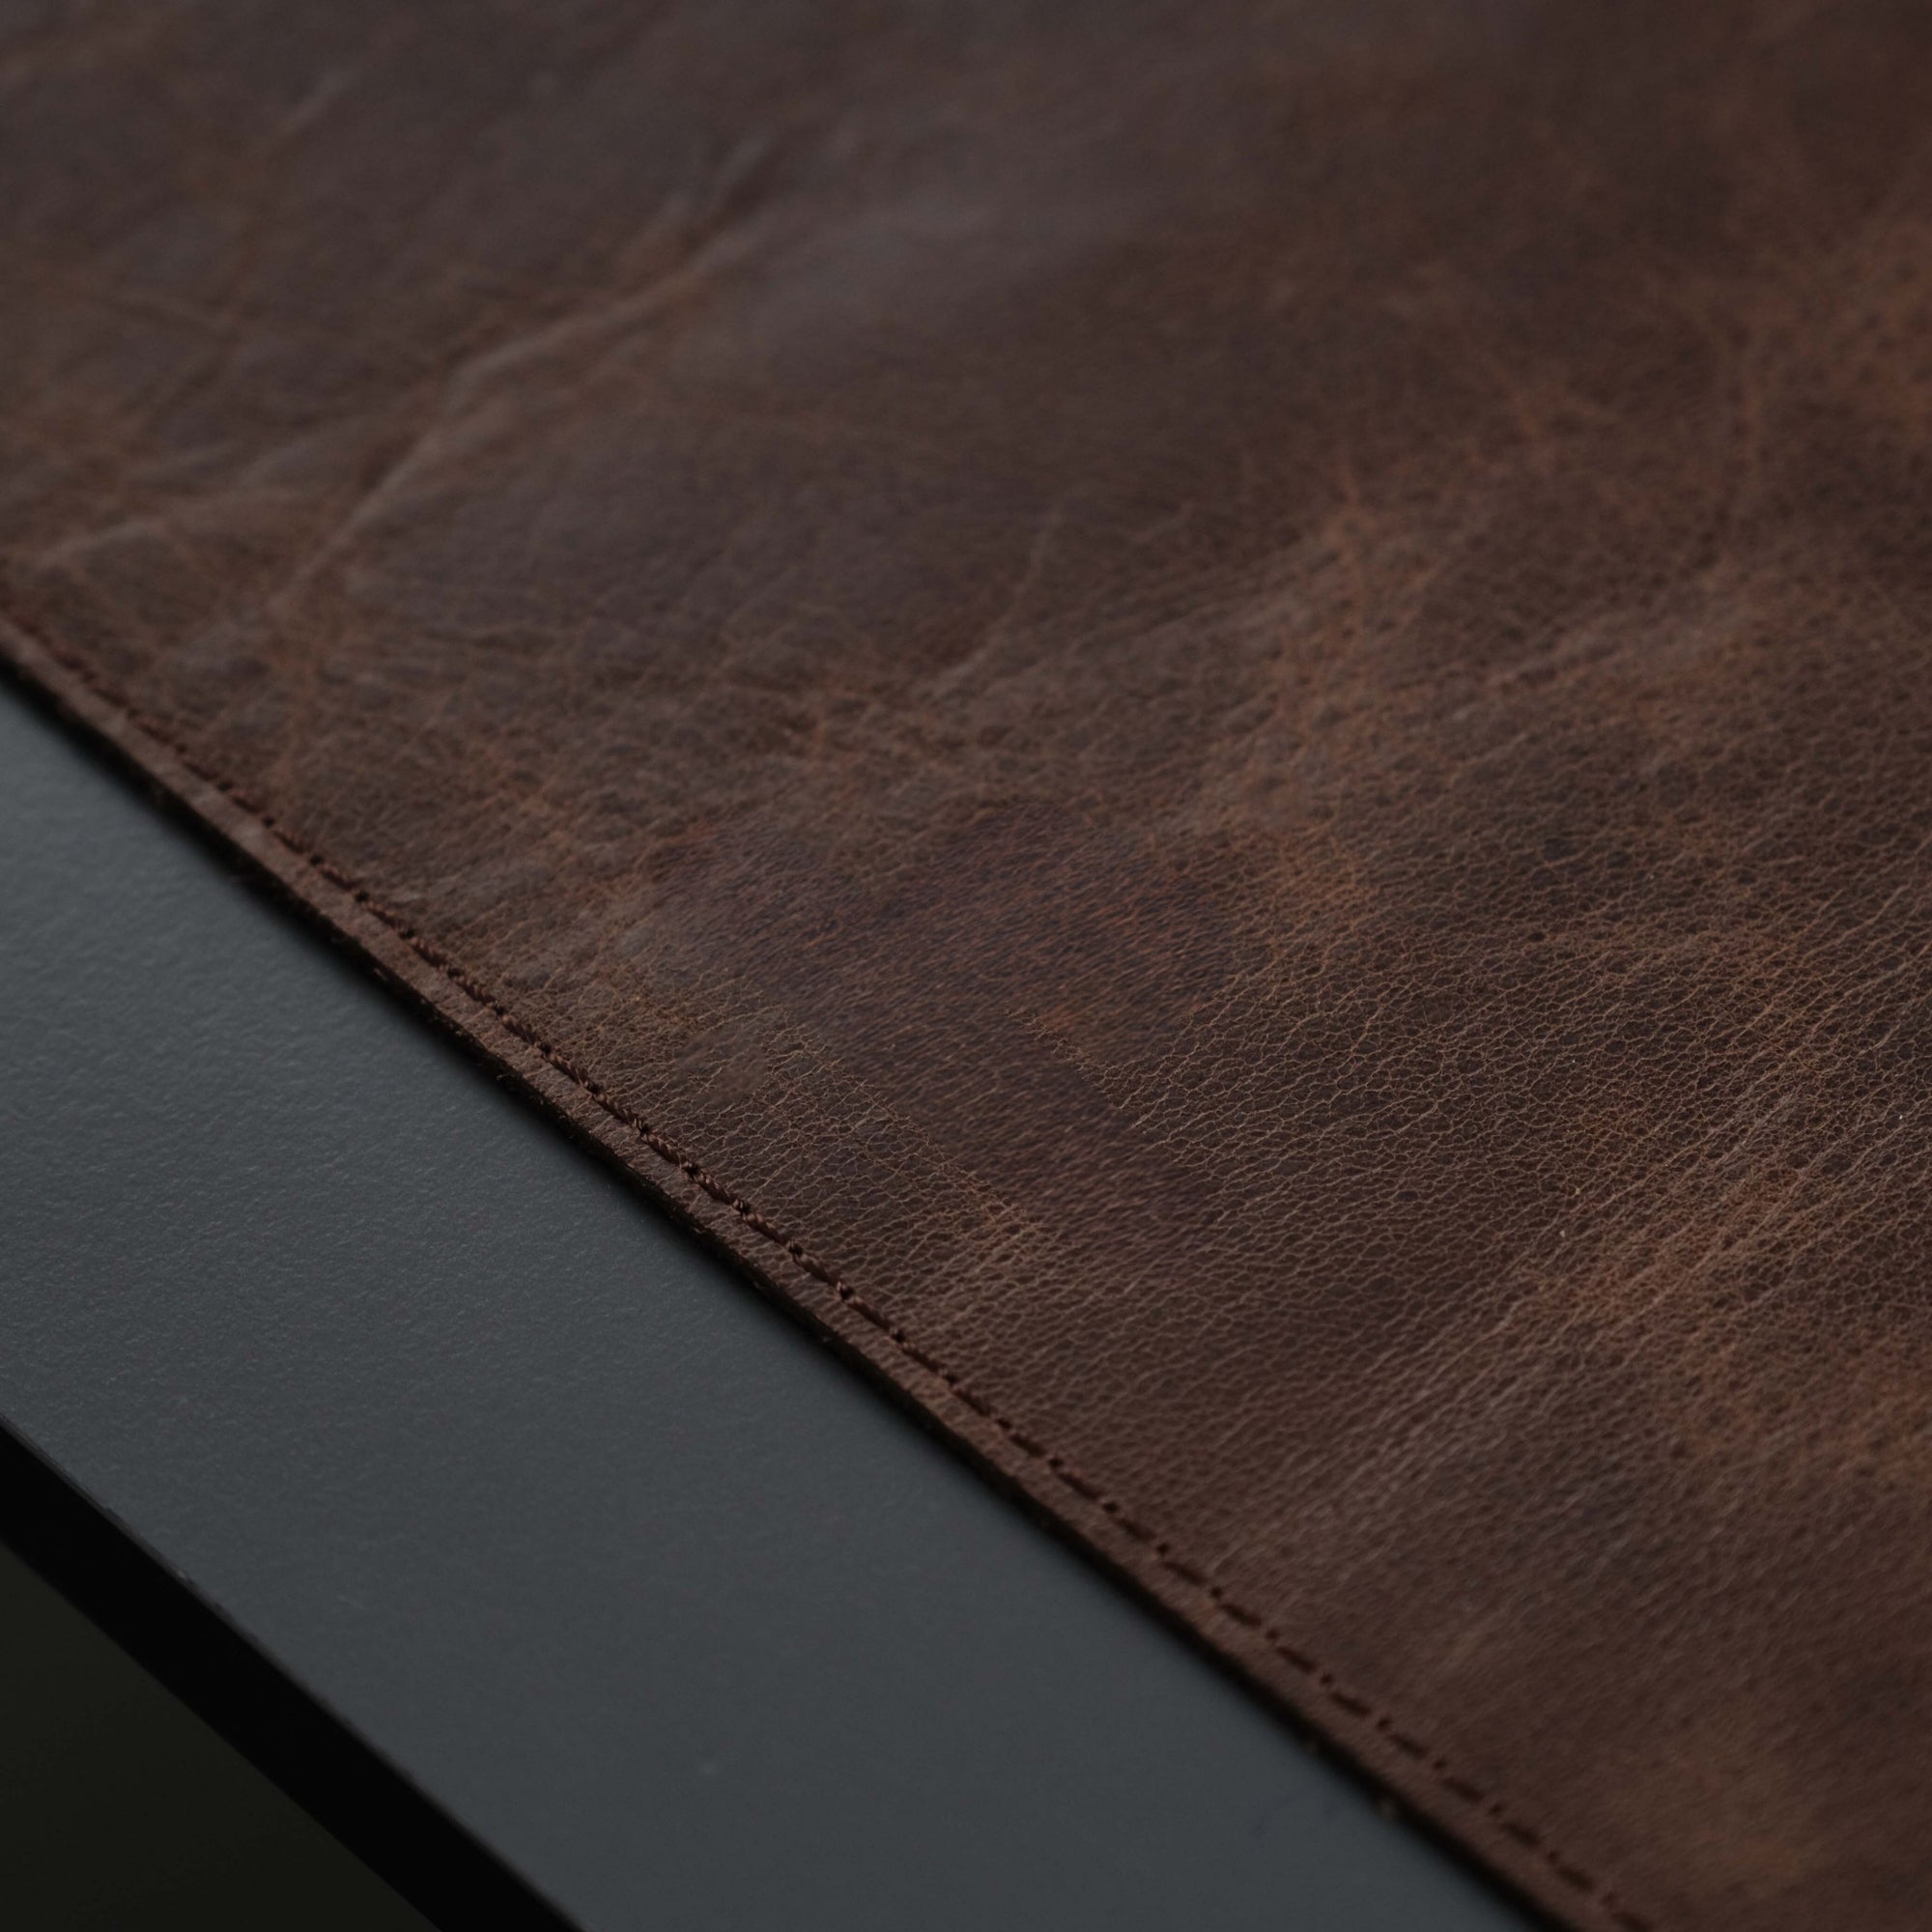 Jersey Dark Brown Leather Desk Pad for Office and Home-36x19 inch---TORONATA